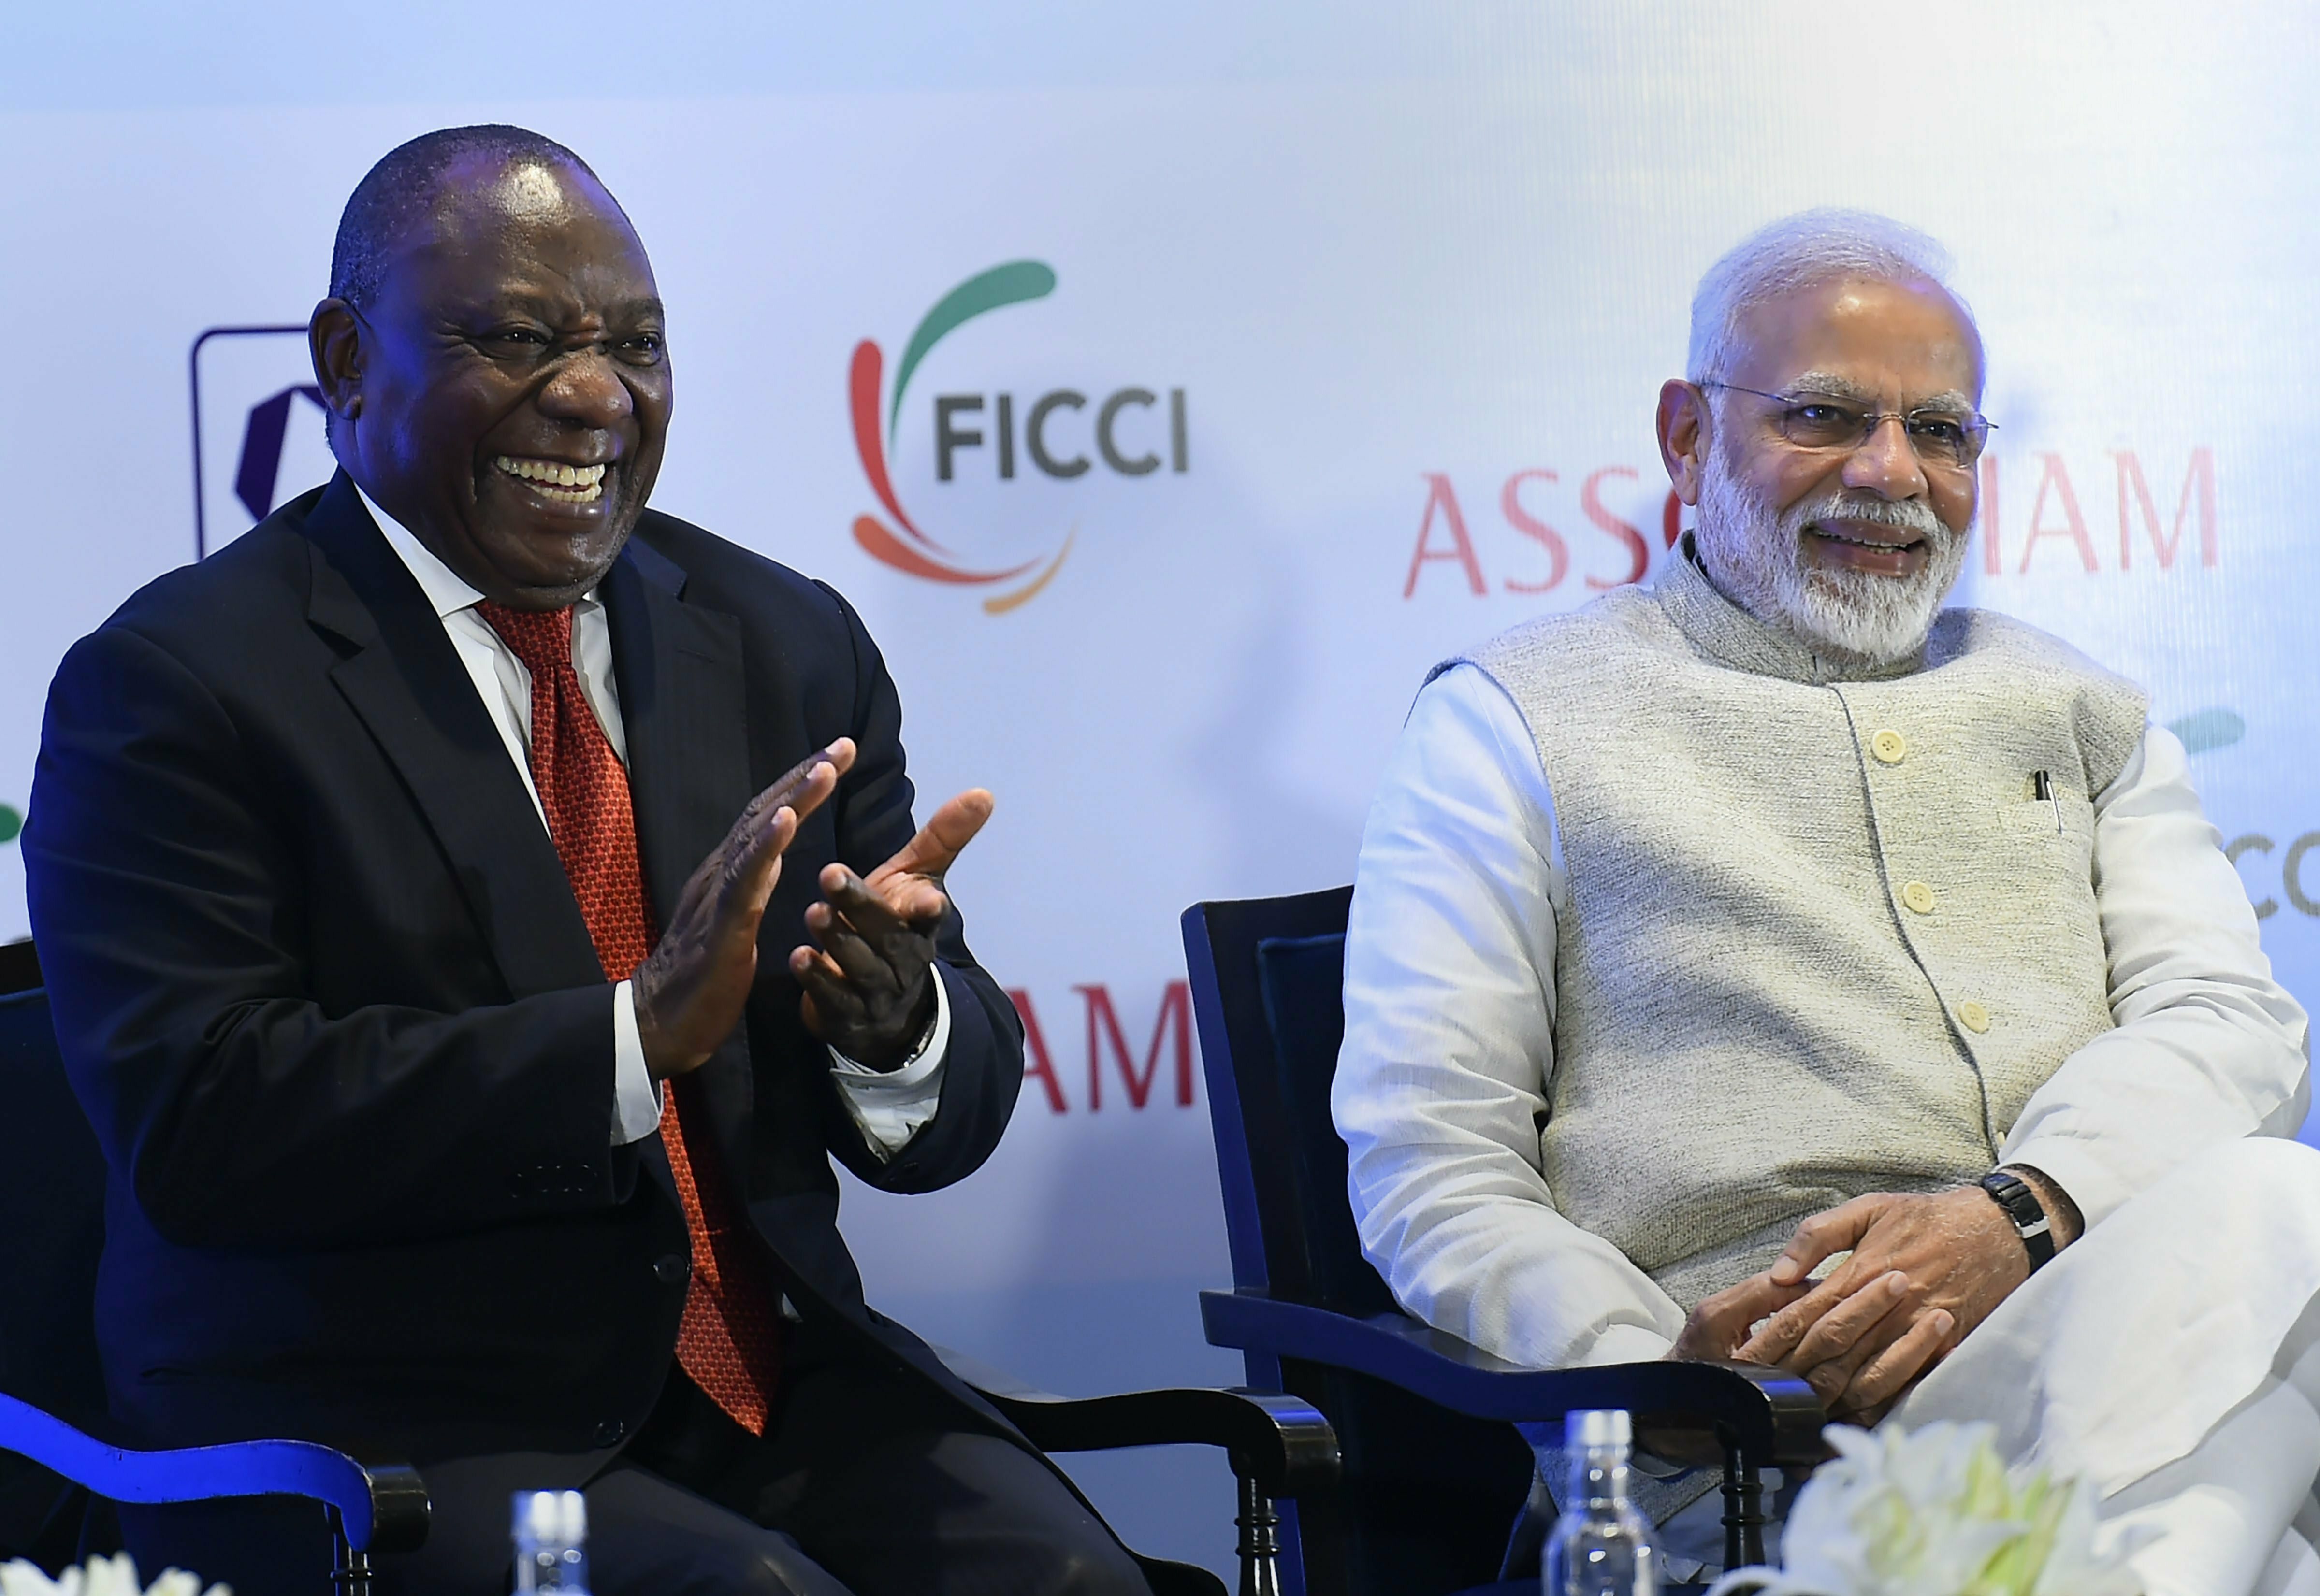 Prime Minister Narendra Modi and South African President Cyril Ramaphosa during an India-South Africa Business Forum meeting in New Delhi - PTI